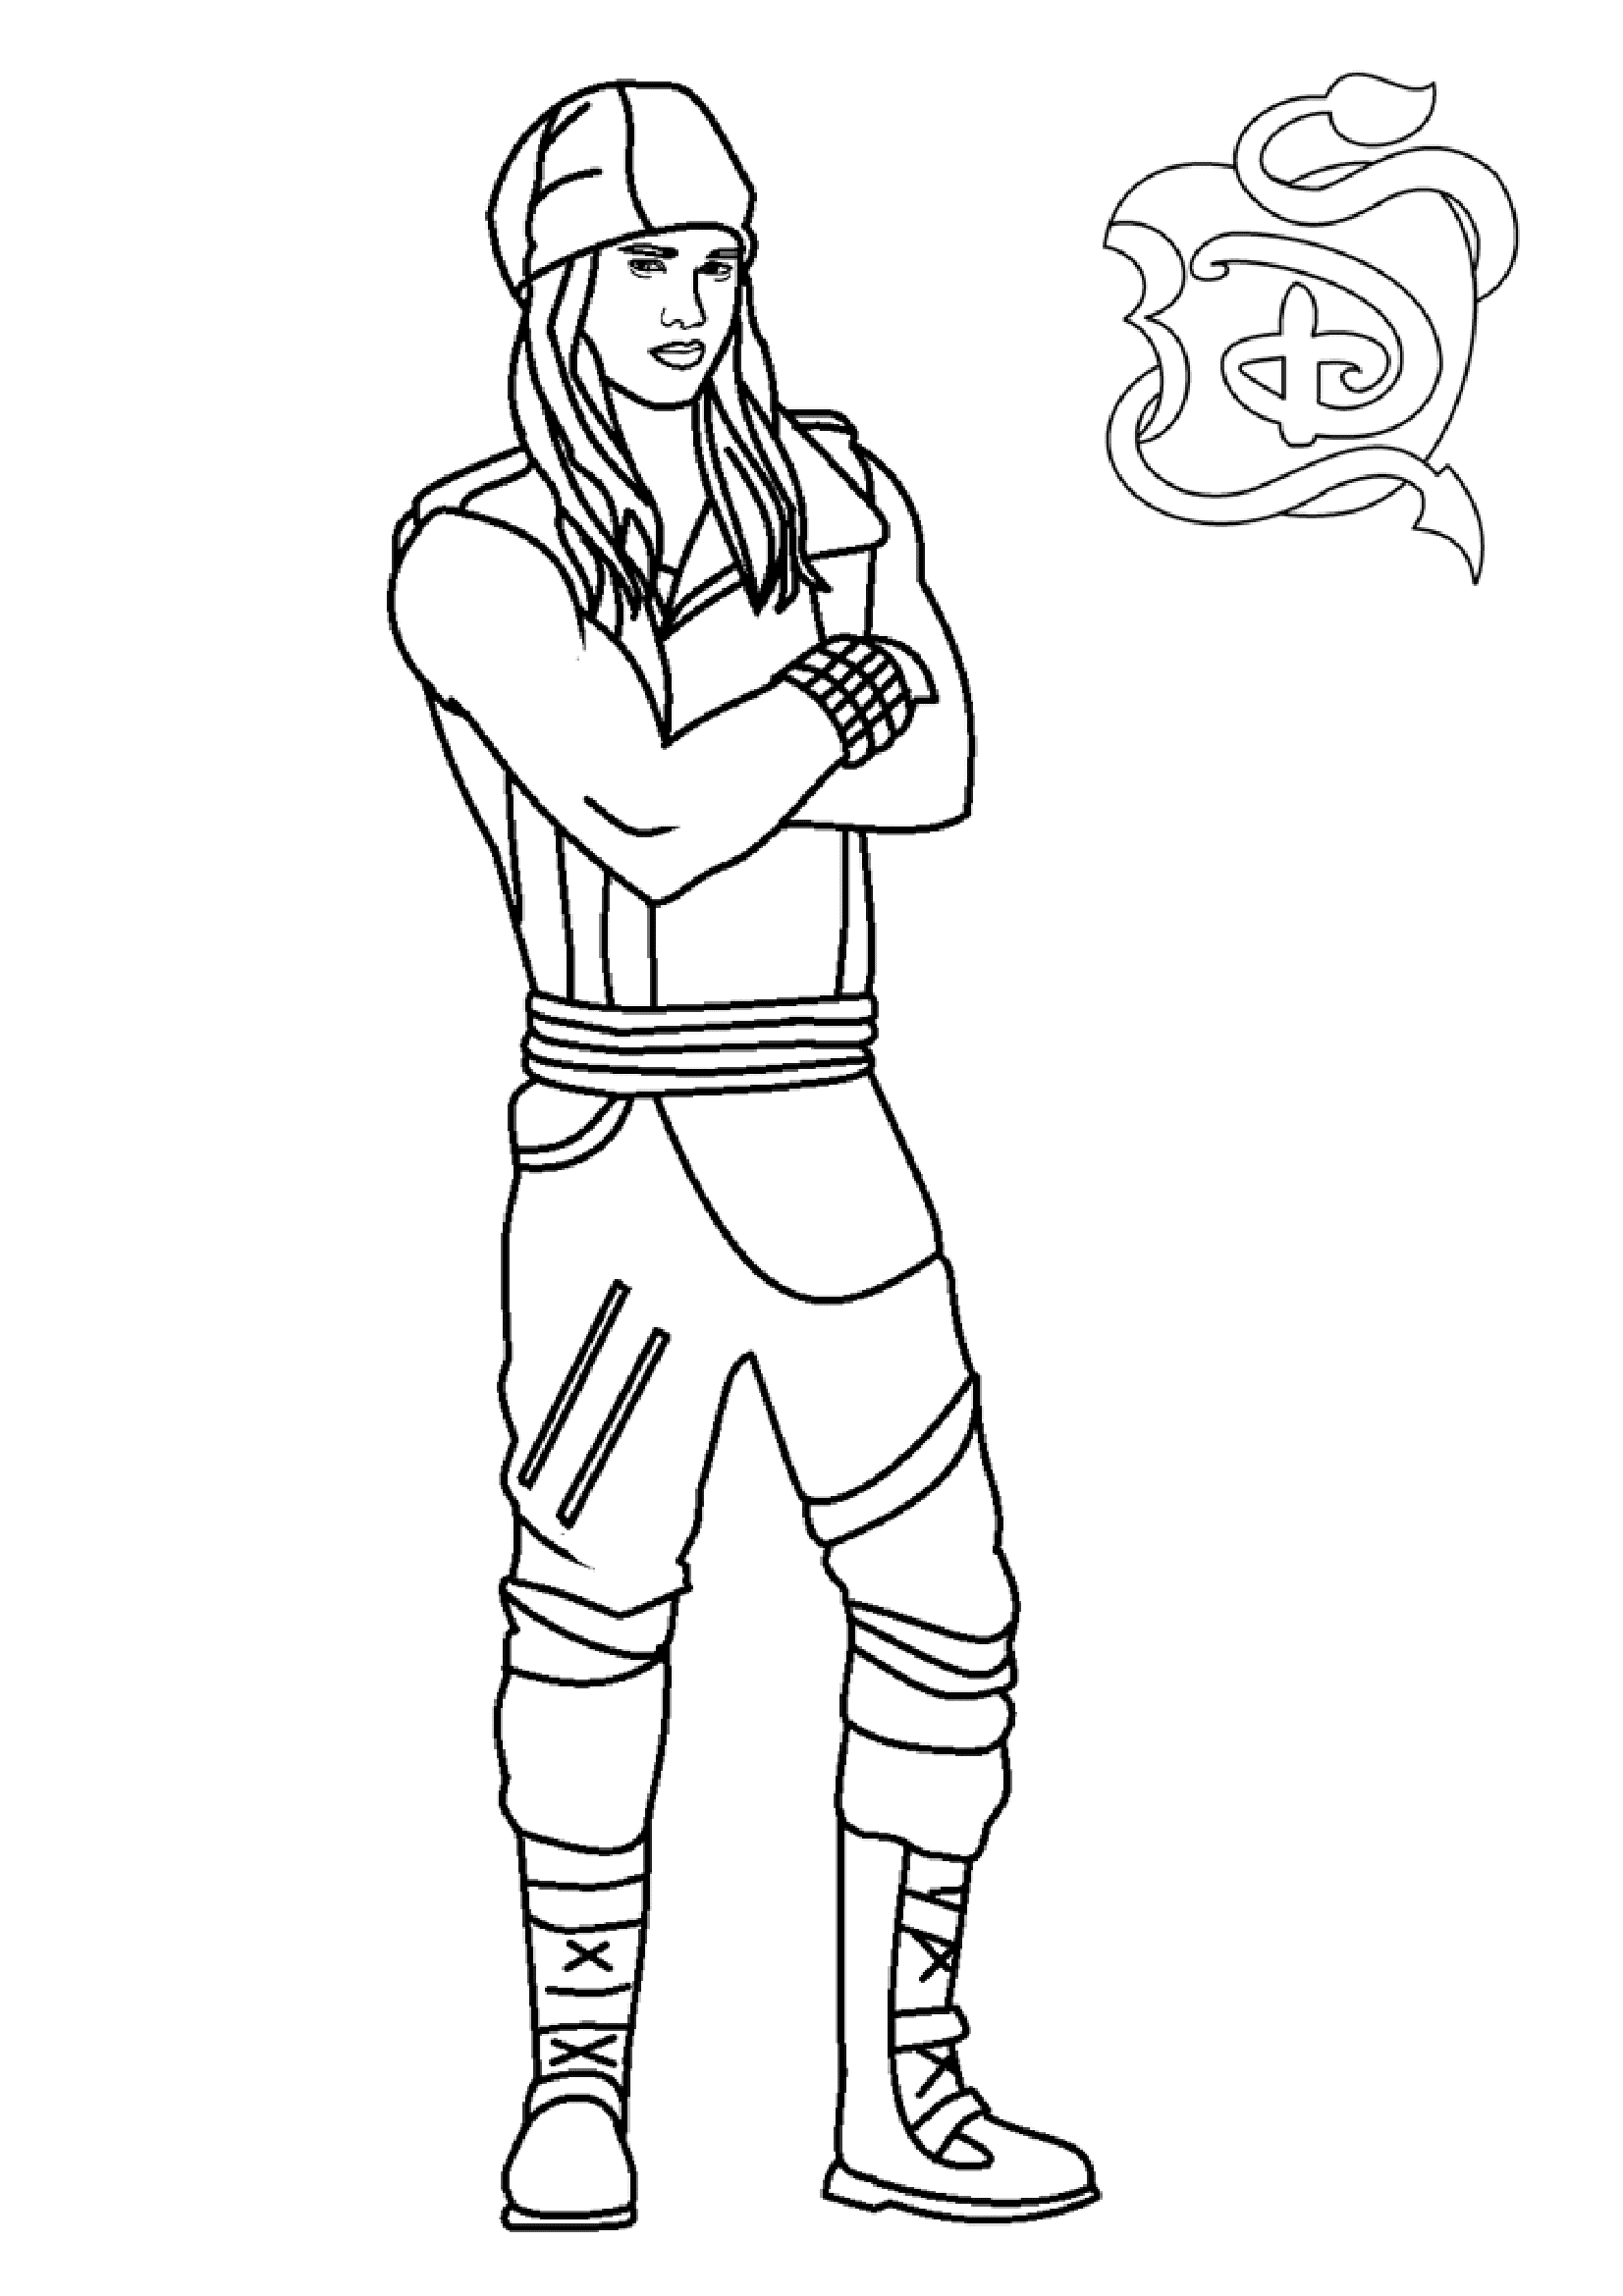 Jay joins the tourney team from Descendants Coloring Pages